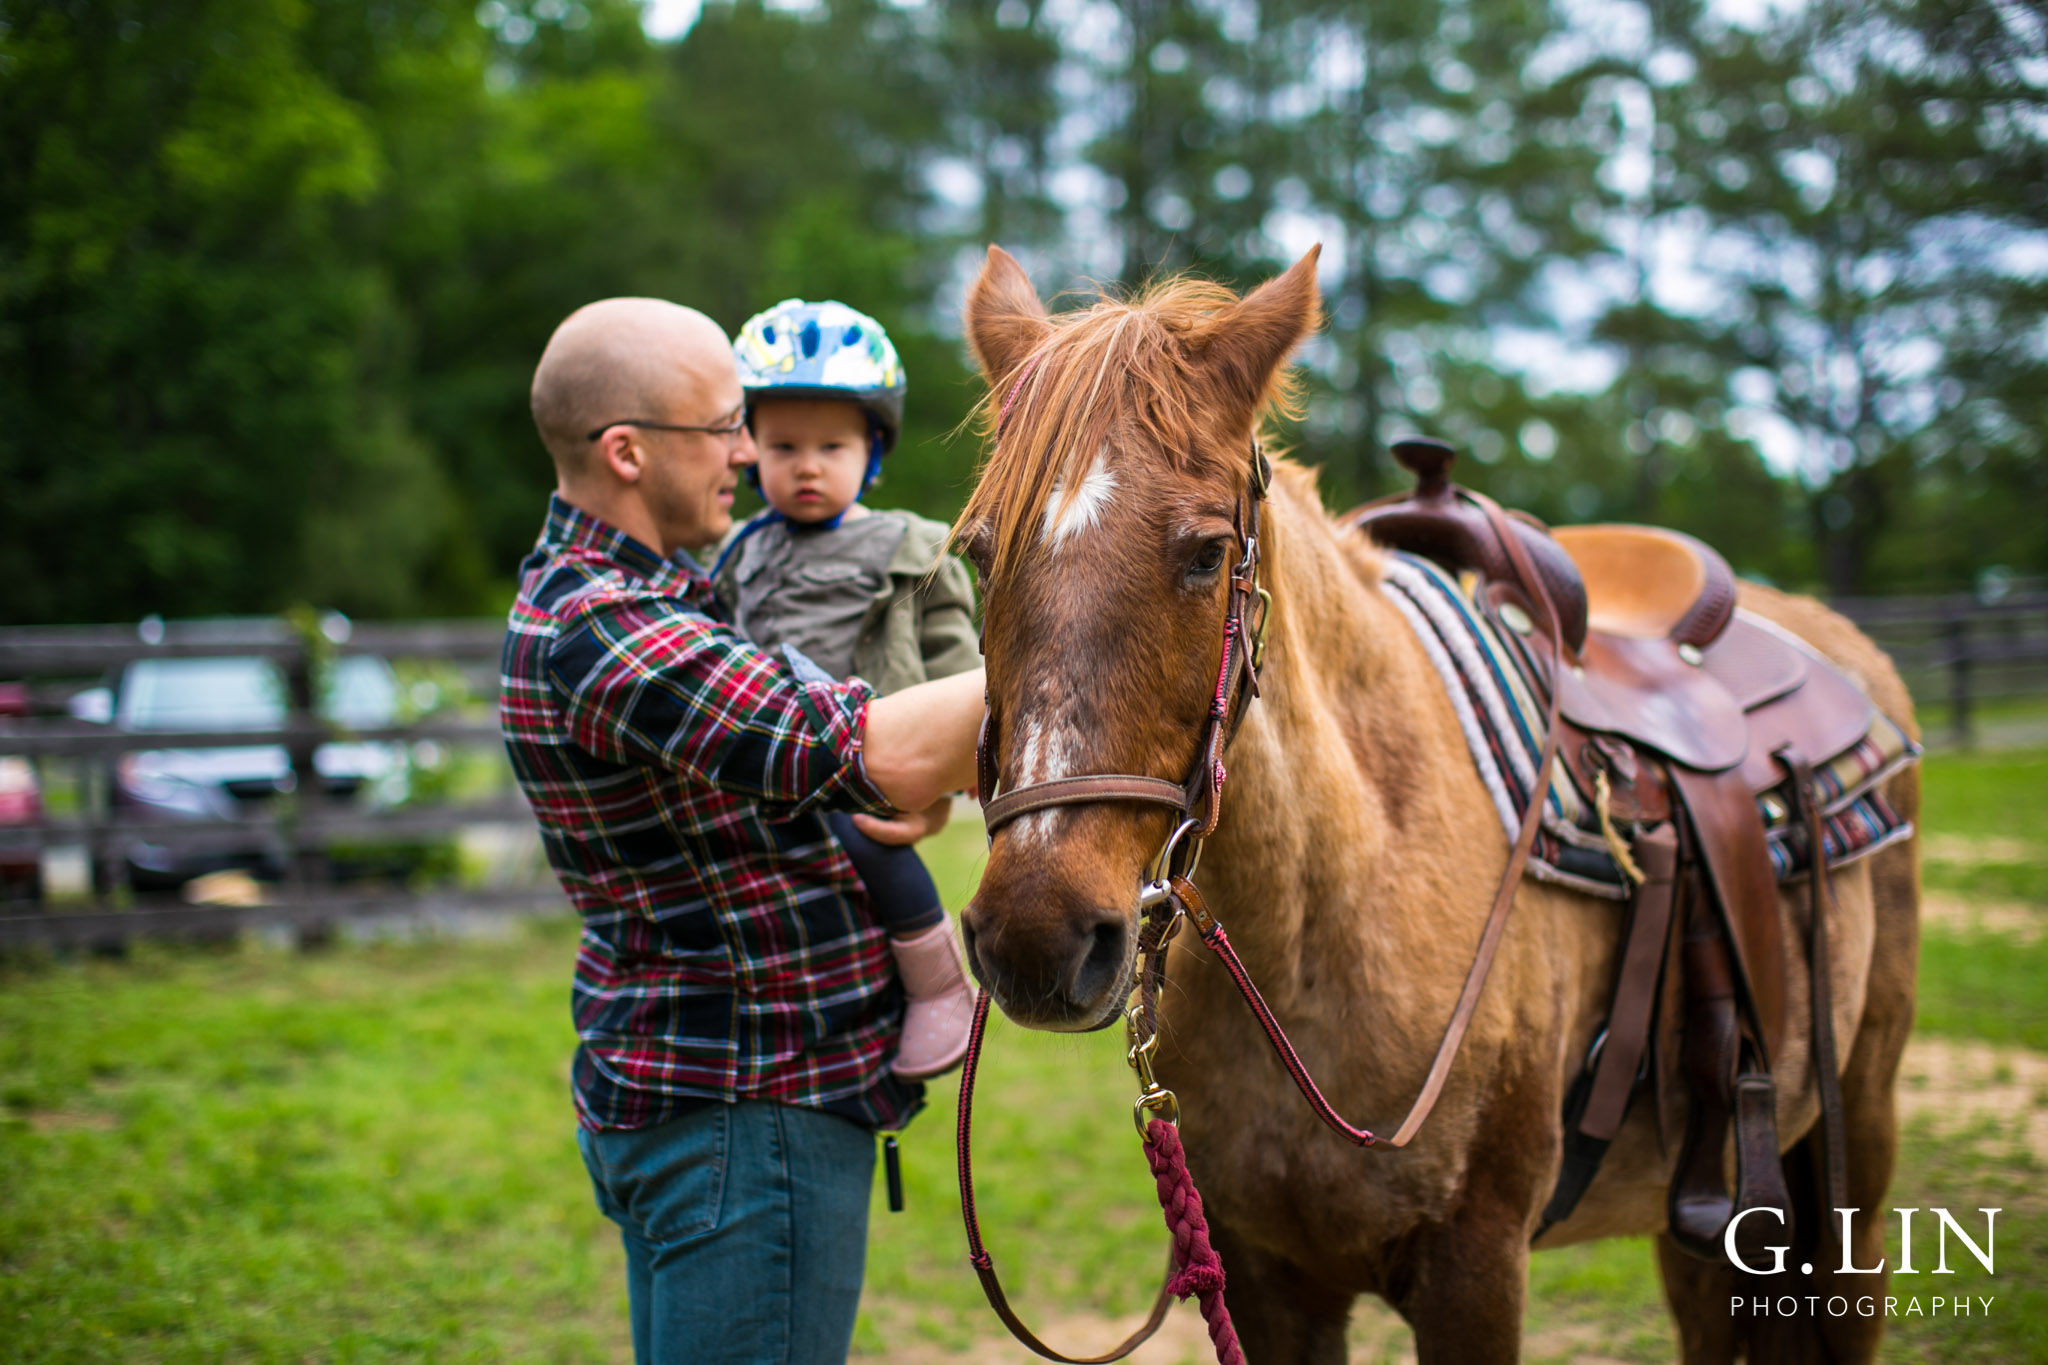 G. Lin Photography | Raleigh Event Photographer | Father and son petting horse on field